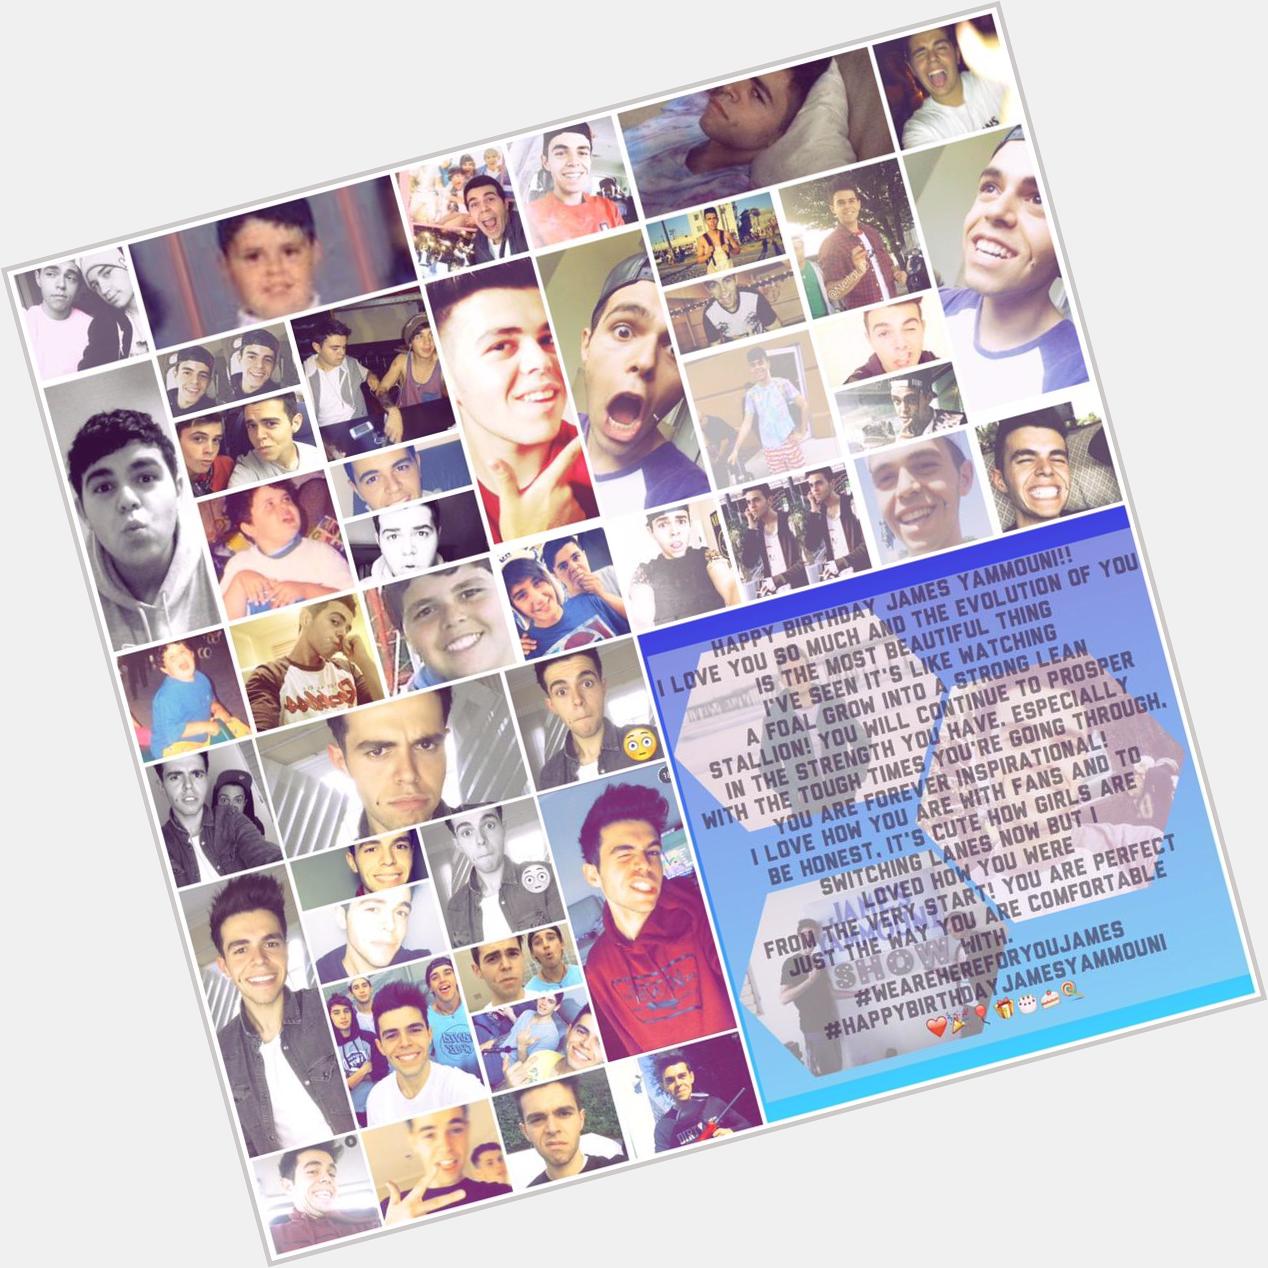 I\m backkk baby happy birthday, i hope you like my message to you and my edit ~ evolution of james  